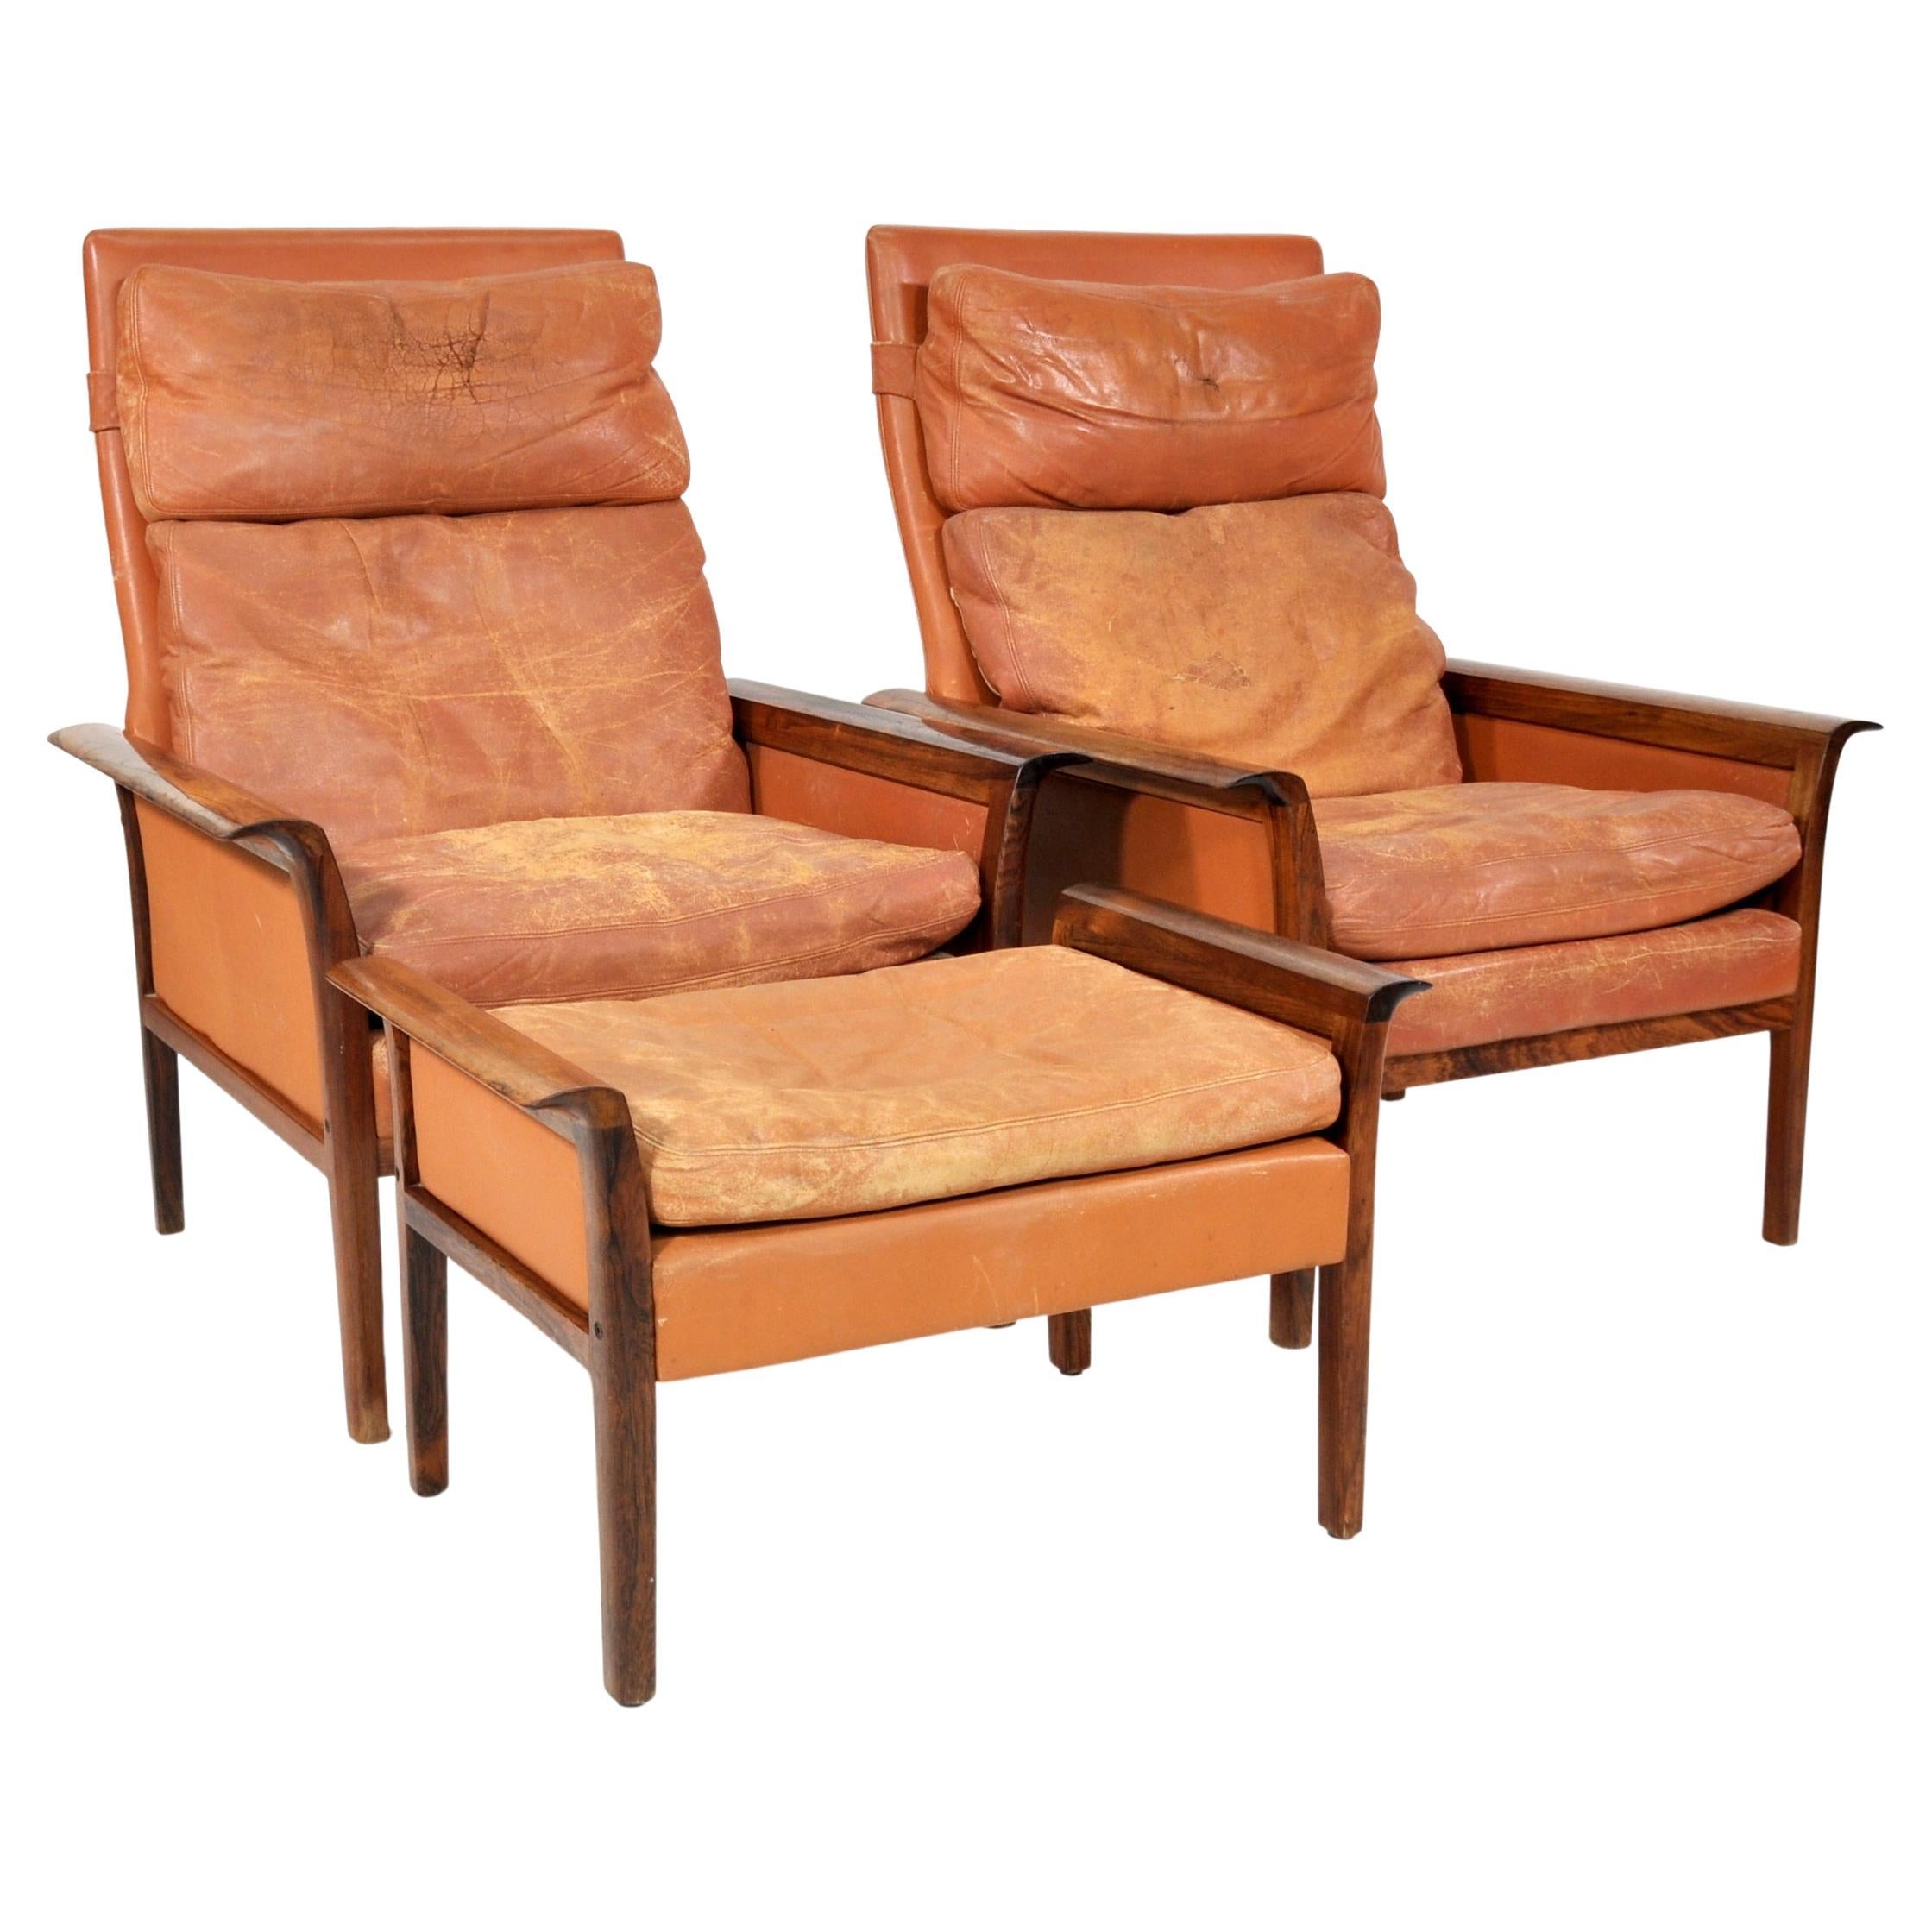 Rosewood Cognac Leather Chairs with Ottoman, by Fredrik Kayser for Vatne Mobler